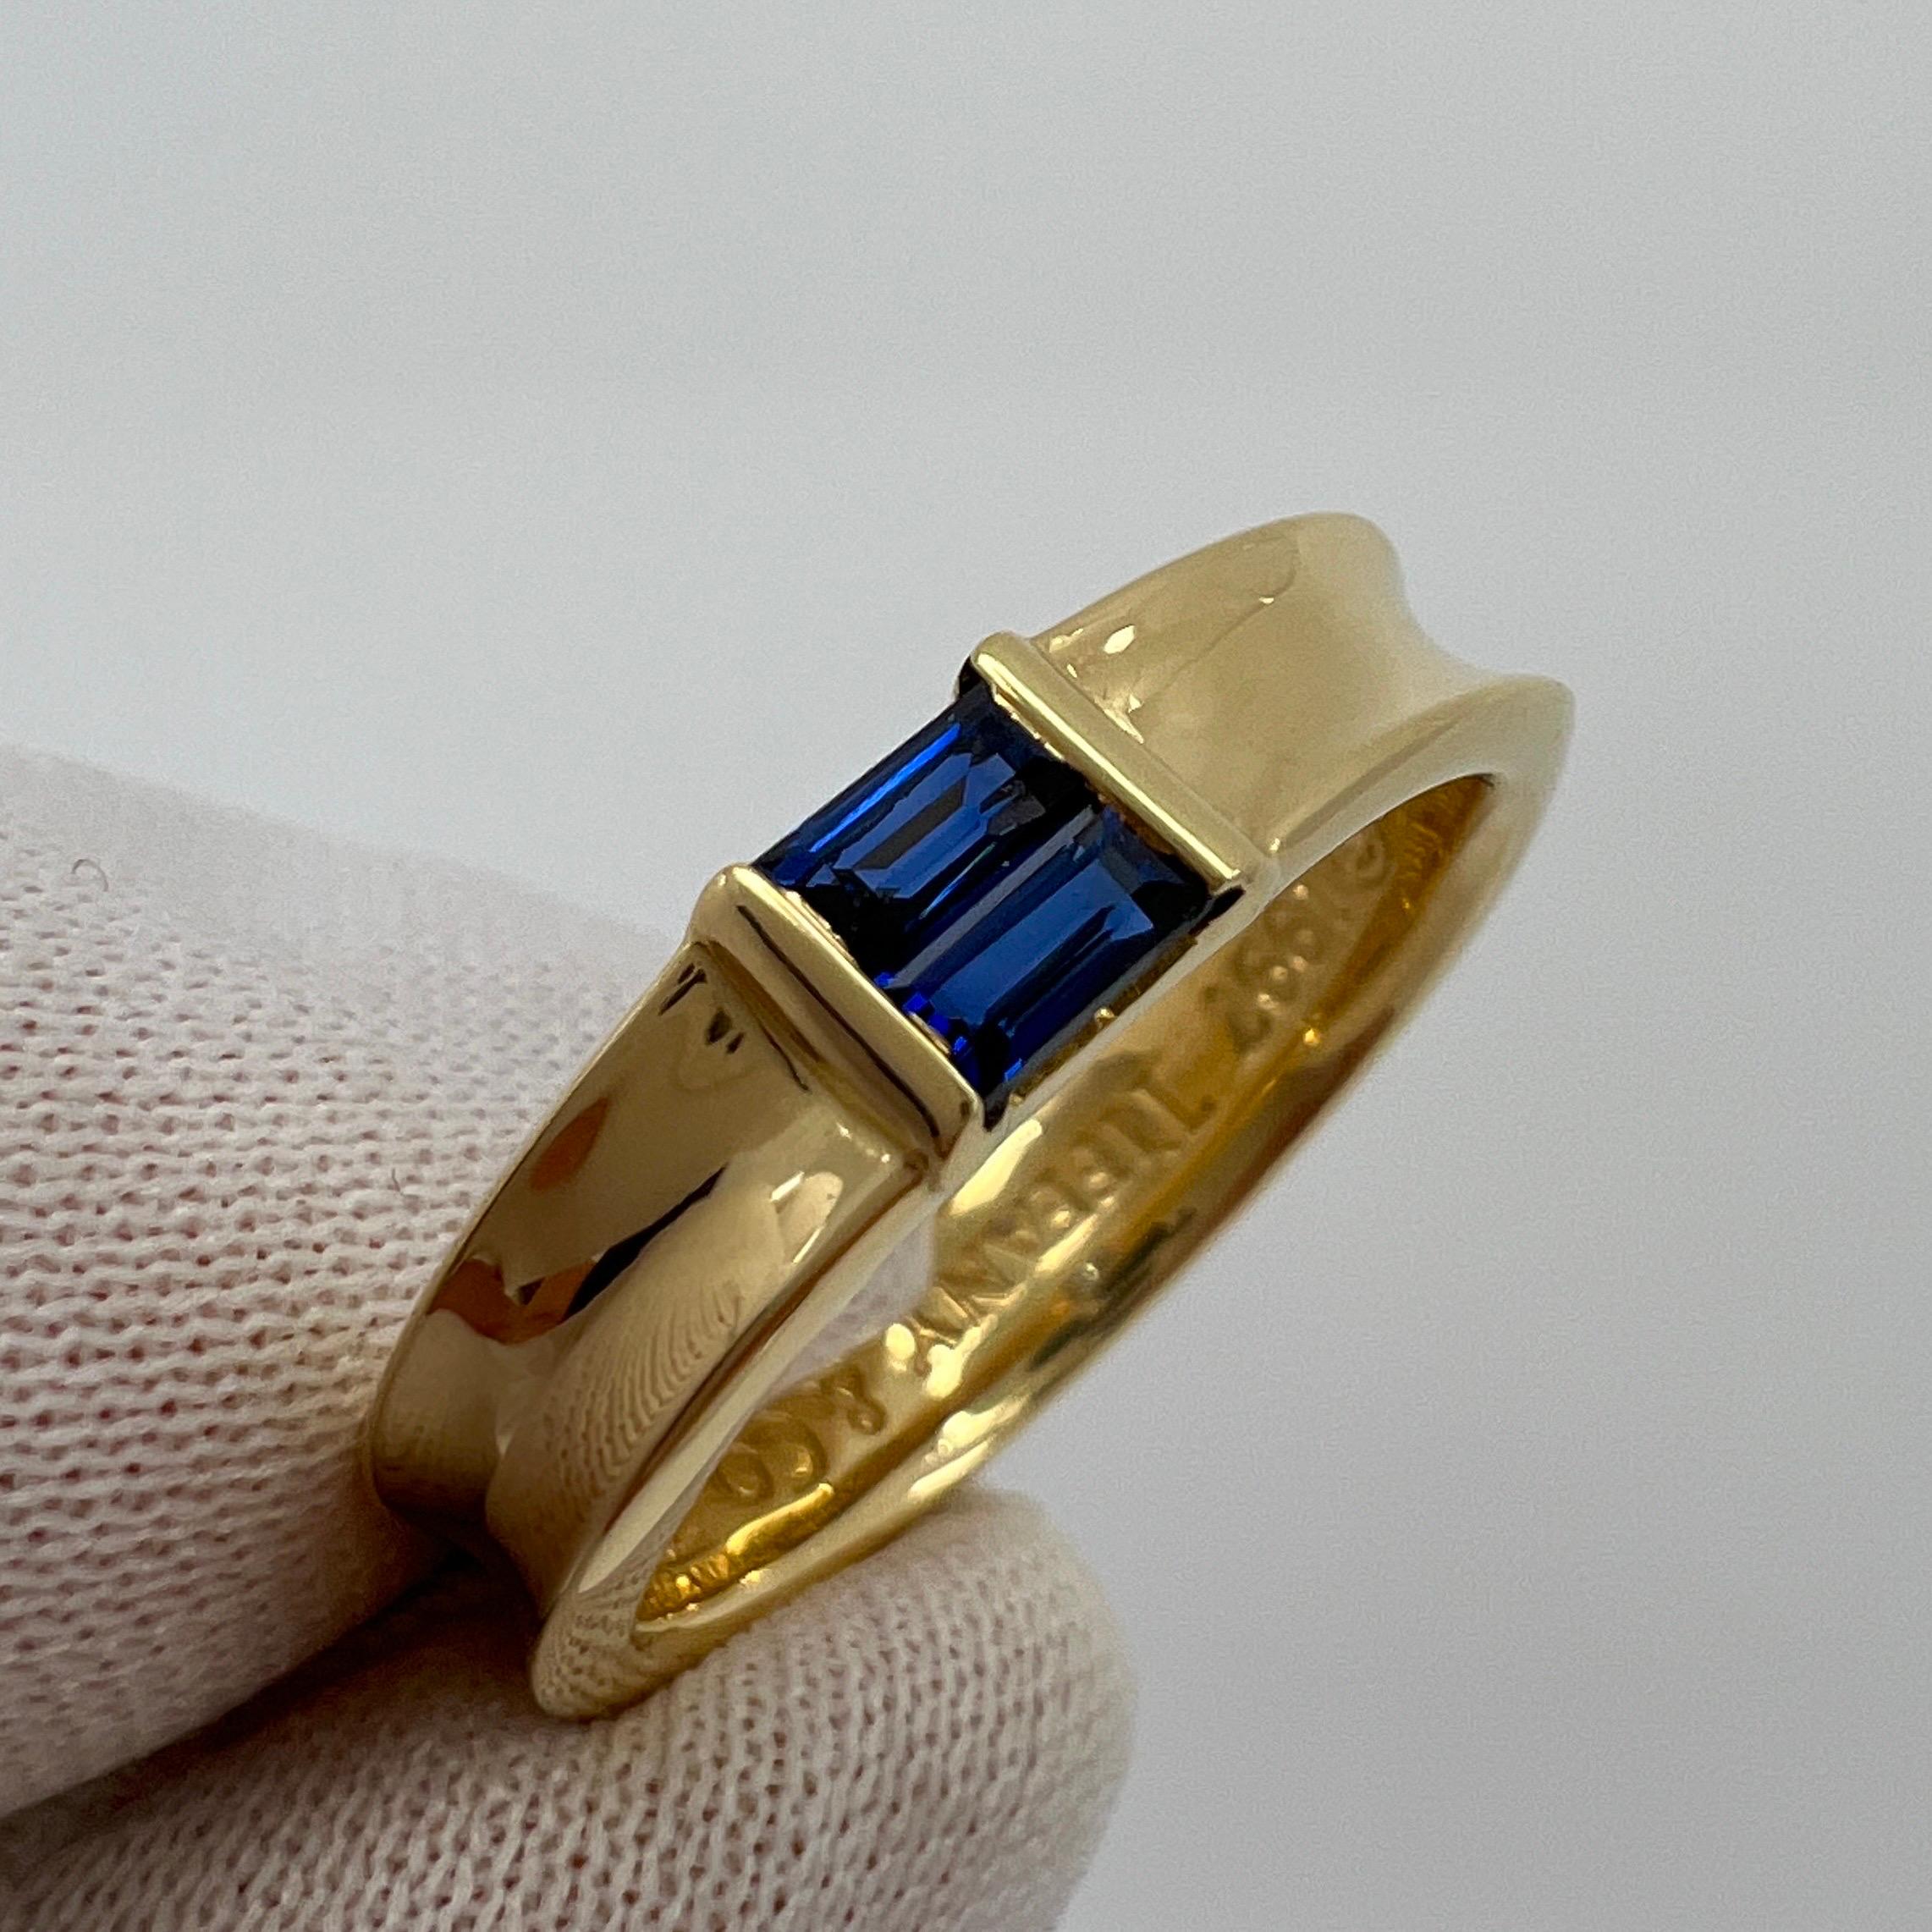 Tiffany & Co. Vivid Blue Sapphire Baguette Cut 18k Yellow Gold Stacking Ring.

A beautifully made yellow gold stacking ring set with x2 fine vivid blue baguette cut sapphires. Superb colour, clarity and cut. Measuring 4x2mm each.
Fine jewellery